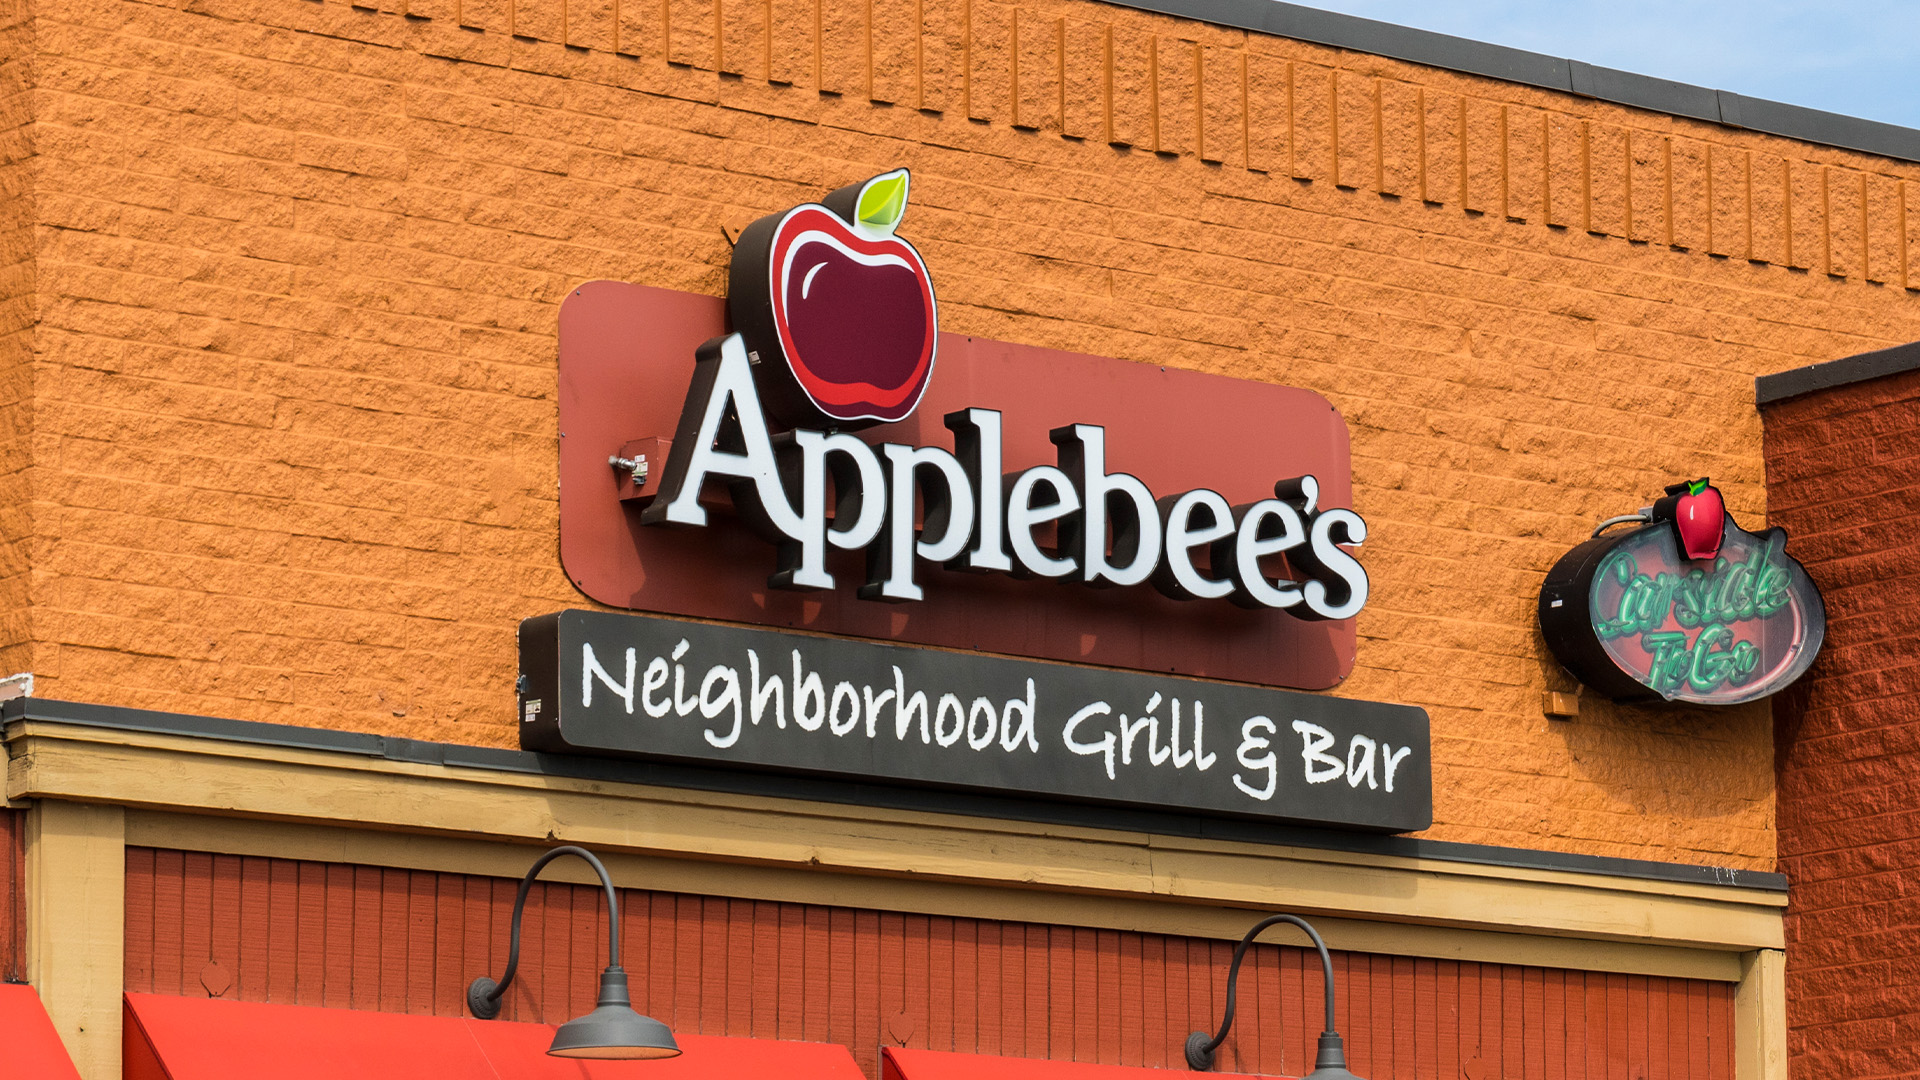 Applebee’s confirms over 20 locations set to shutter in months – but there’s a silver lining for breakfast fans [Video]